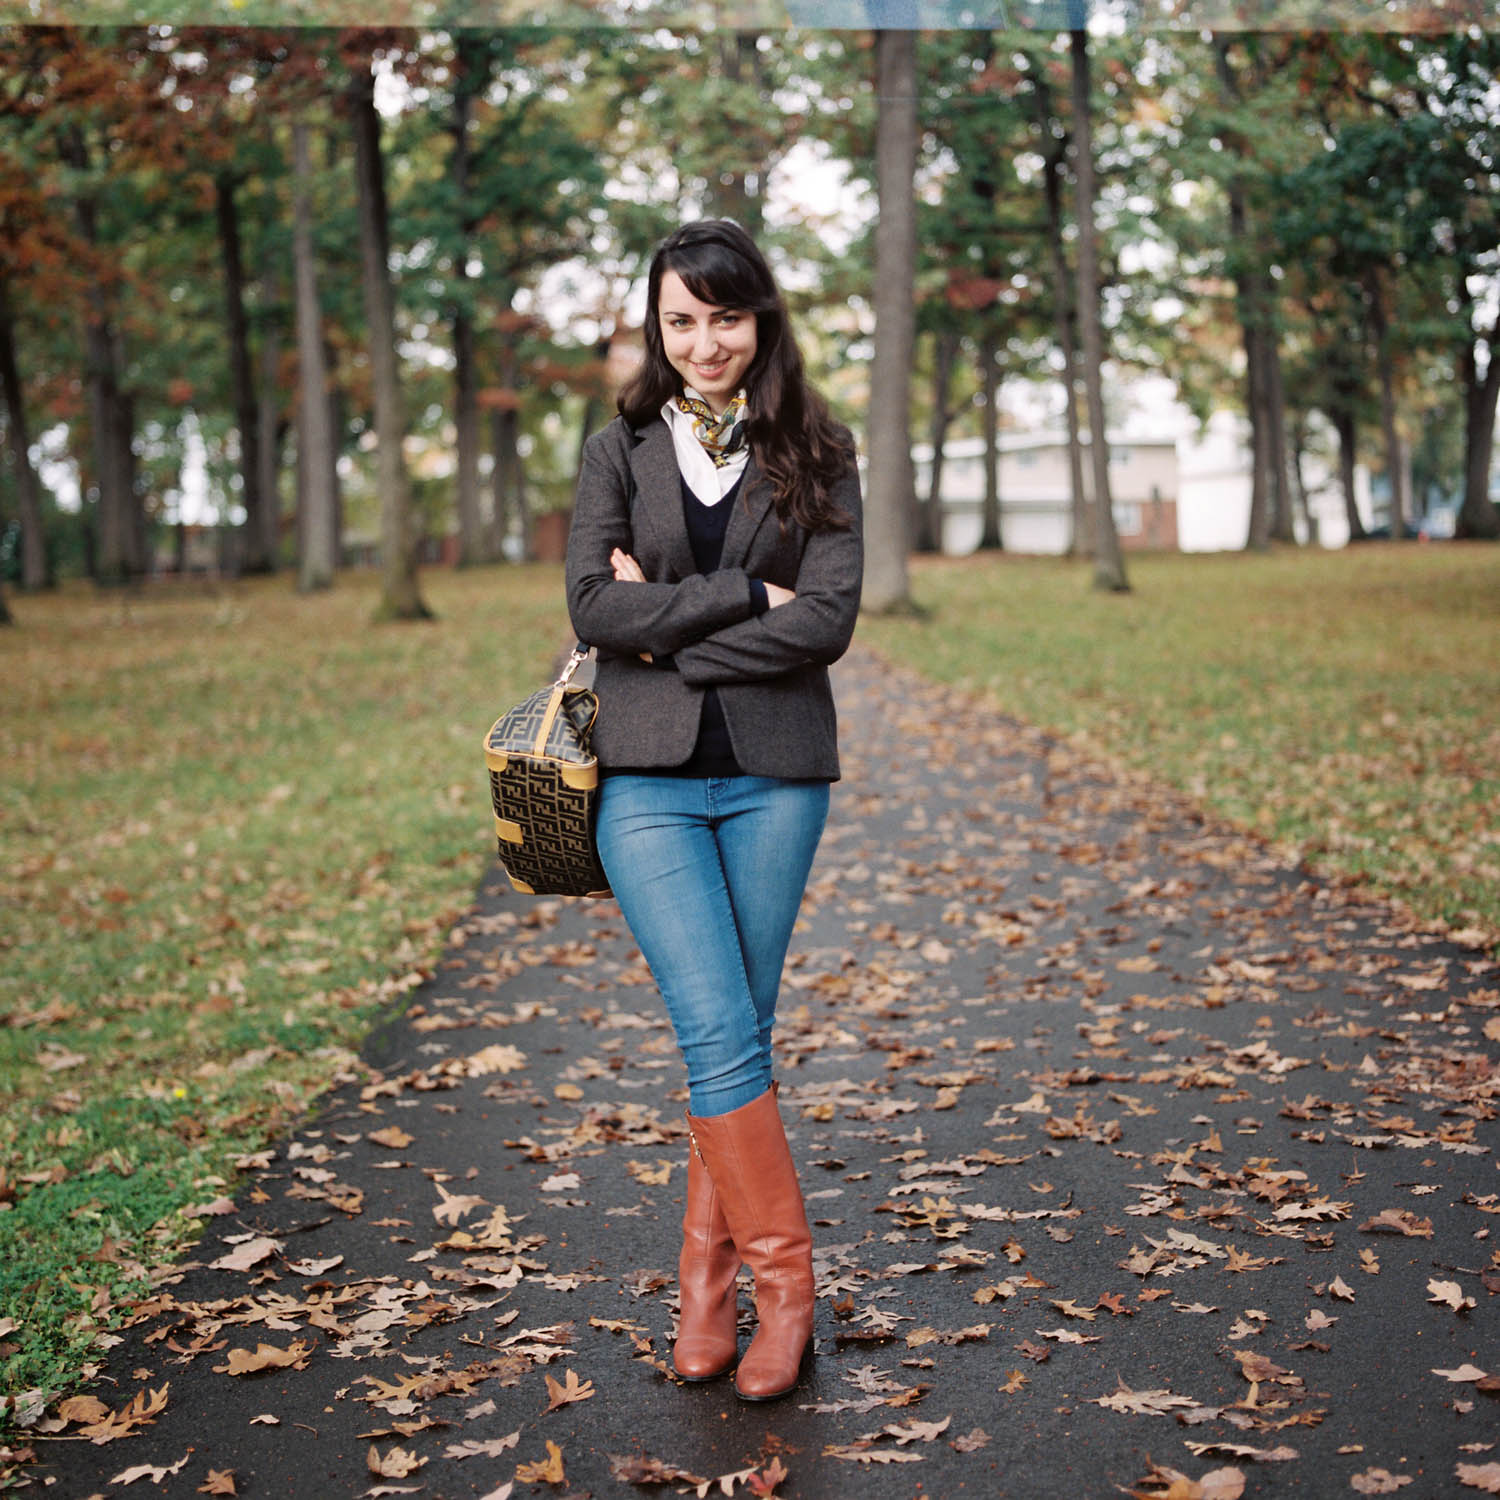 Photograph of a girl in Recreation Park park in autumn